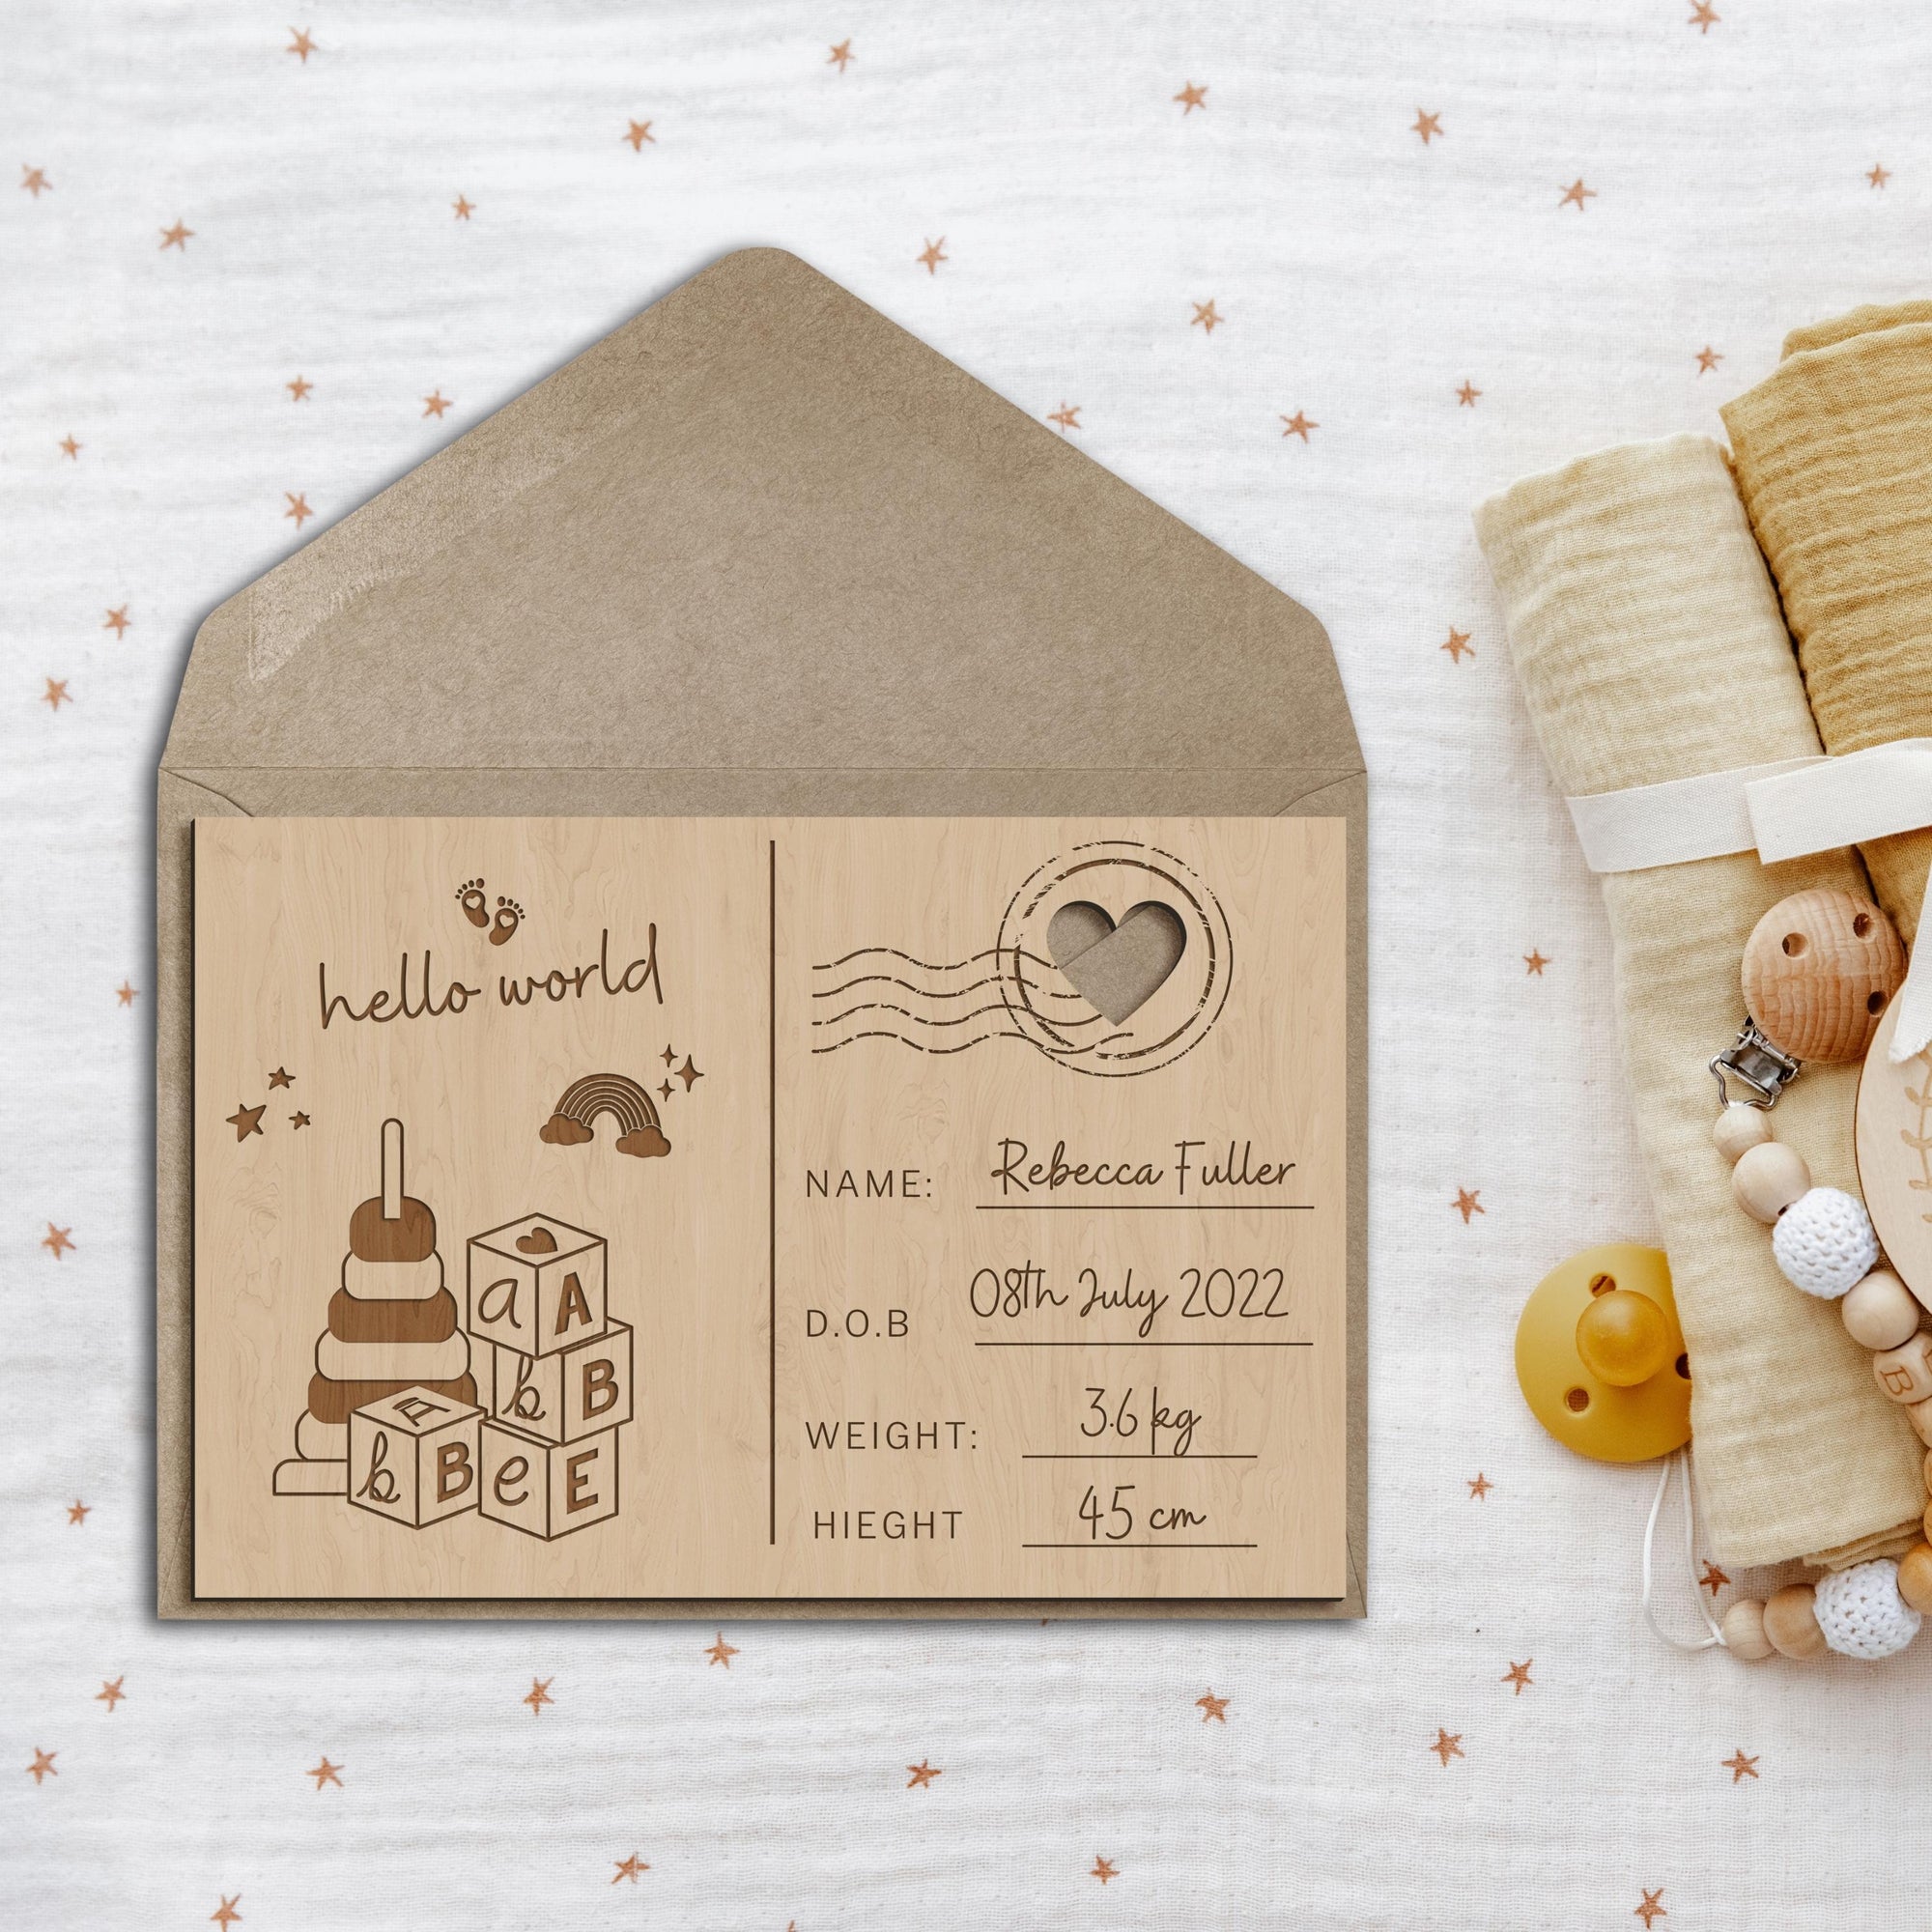 Personalised Wooden Birth Announcement Postcard, Engraved Name, Message Introducing New Baby Arrival &amp; Display Stand, Newborn Keepsake Gift